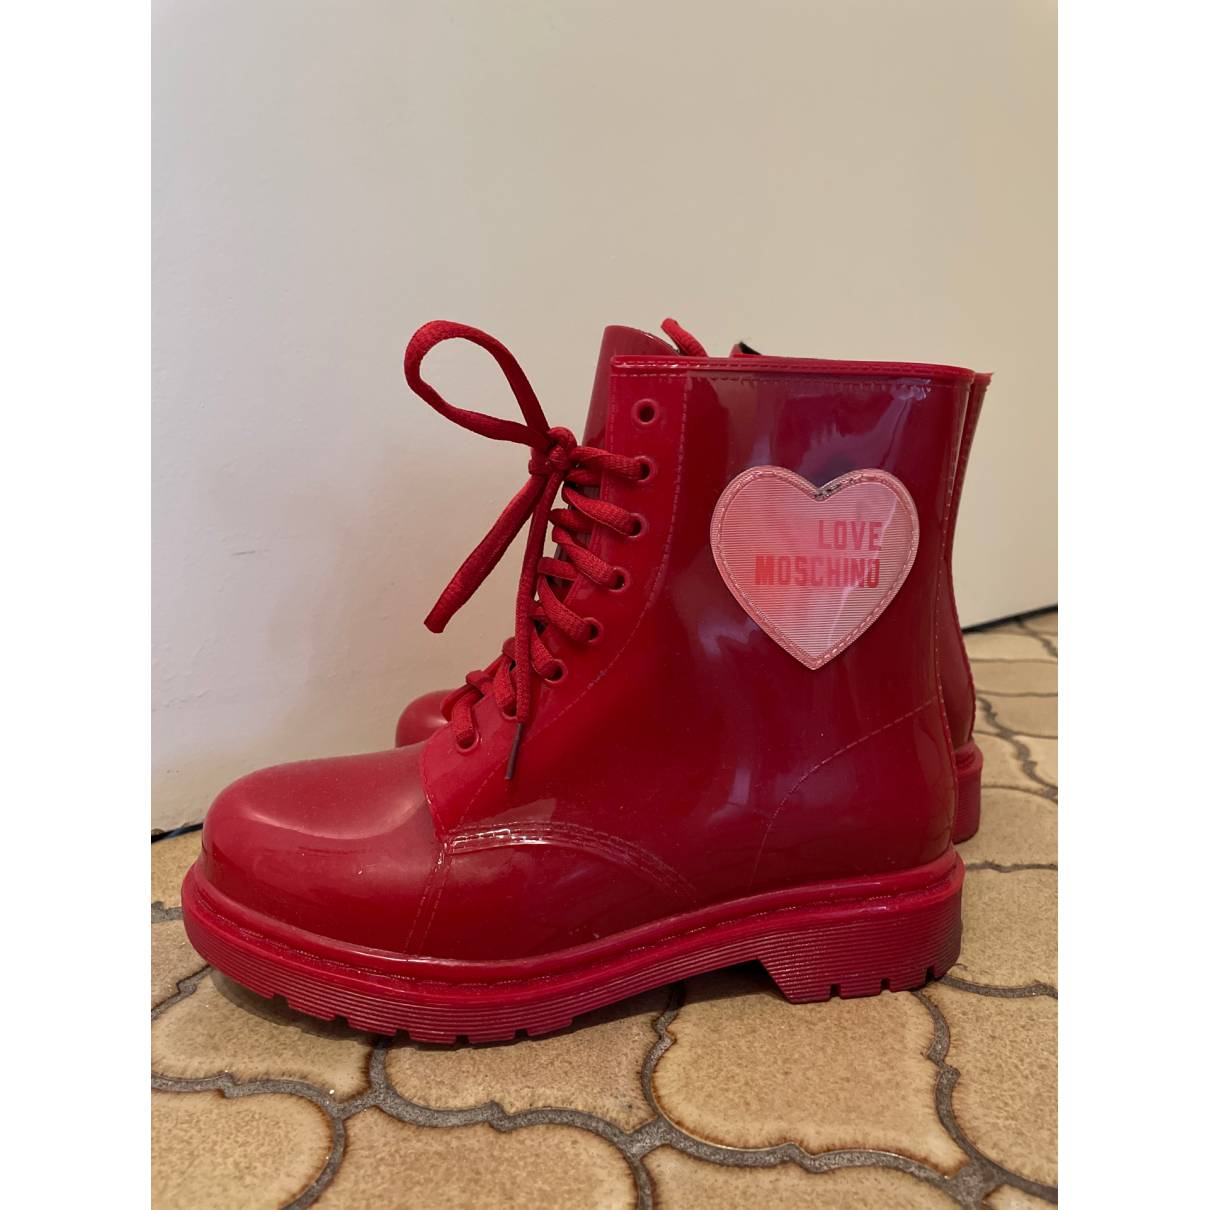 Buy Moschino Love Ankle boots online